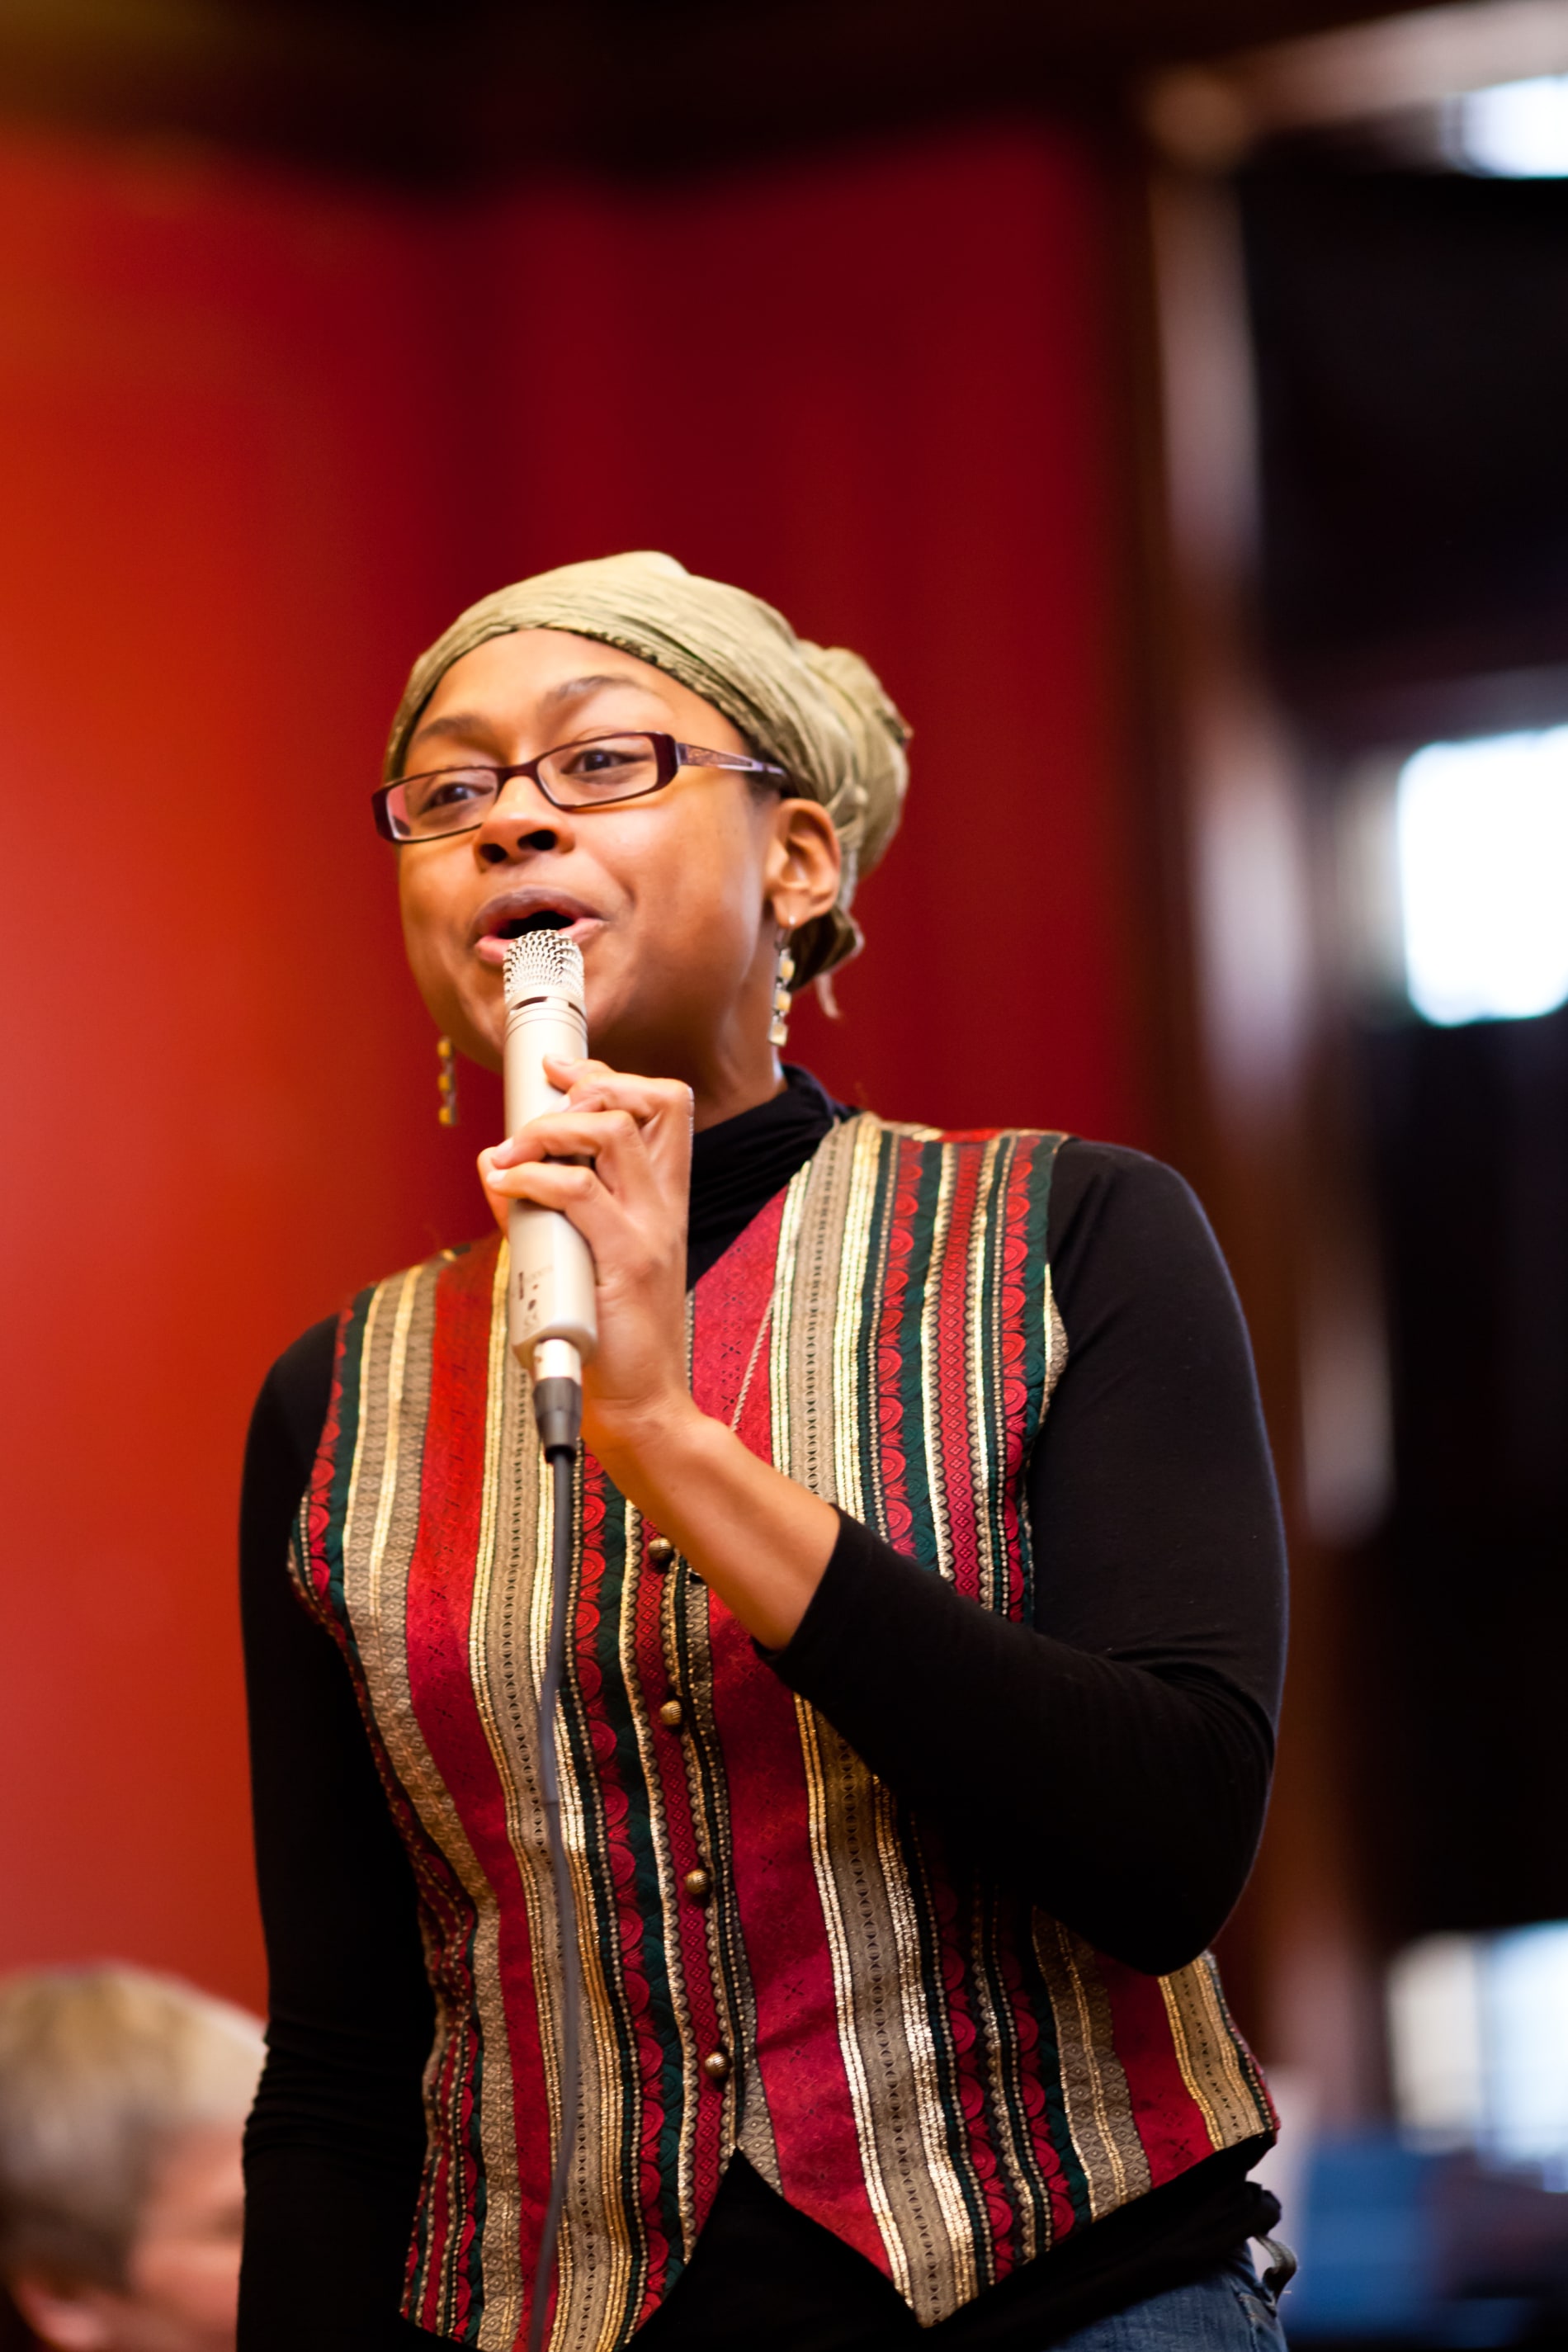 A Black woman speaks into a microphone